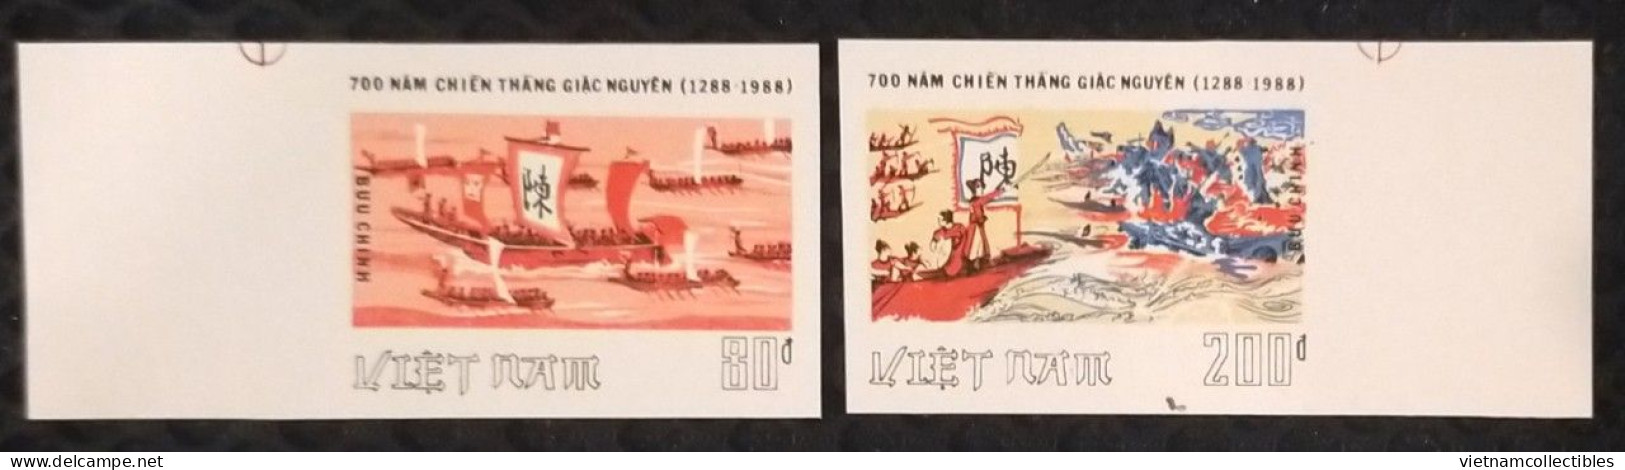 Vietnam Viet Nam MNH Imperf Stamps 1988 : 700th Anniversary Of Bach Dang Battle Against China (Ms540) - Vietnam